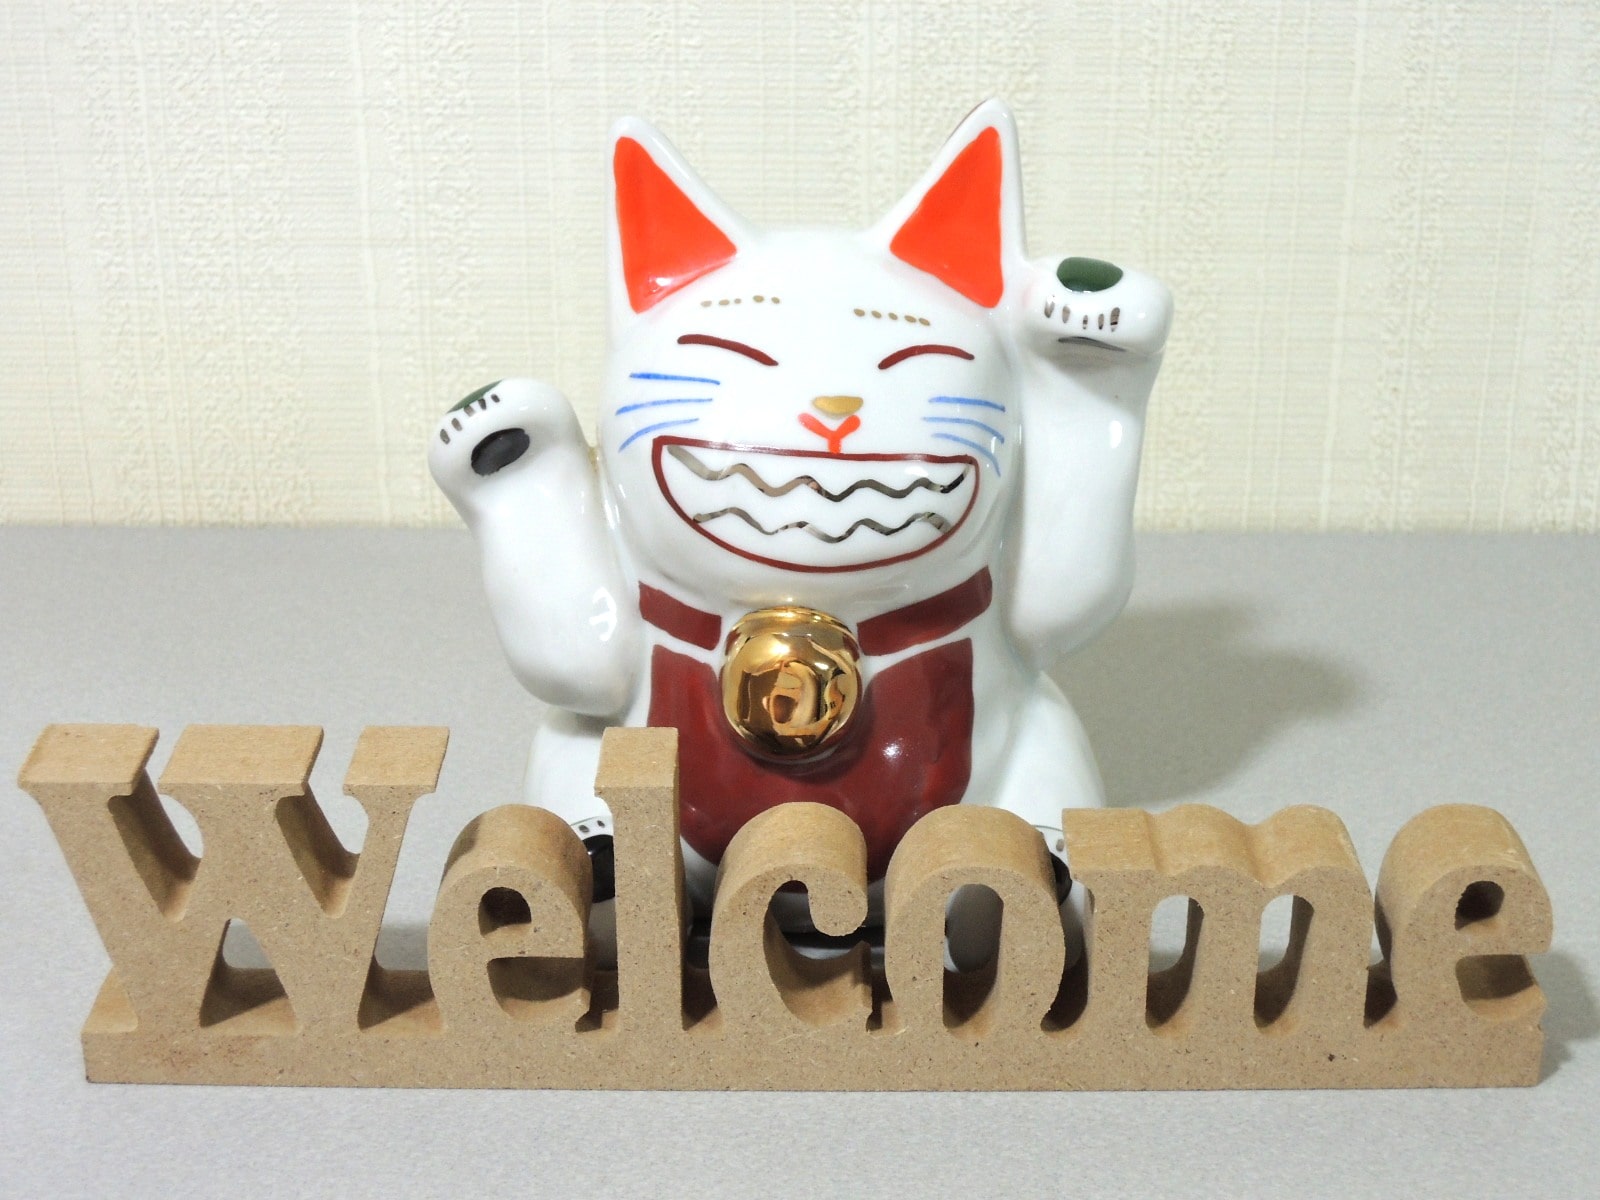 Welcomeの切り抜き文字プレートと招き猫